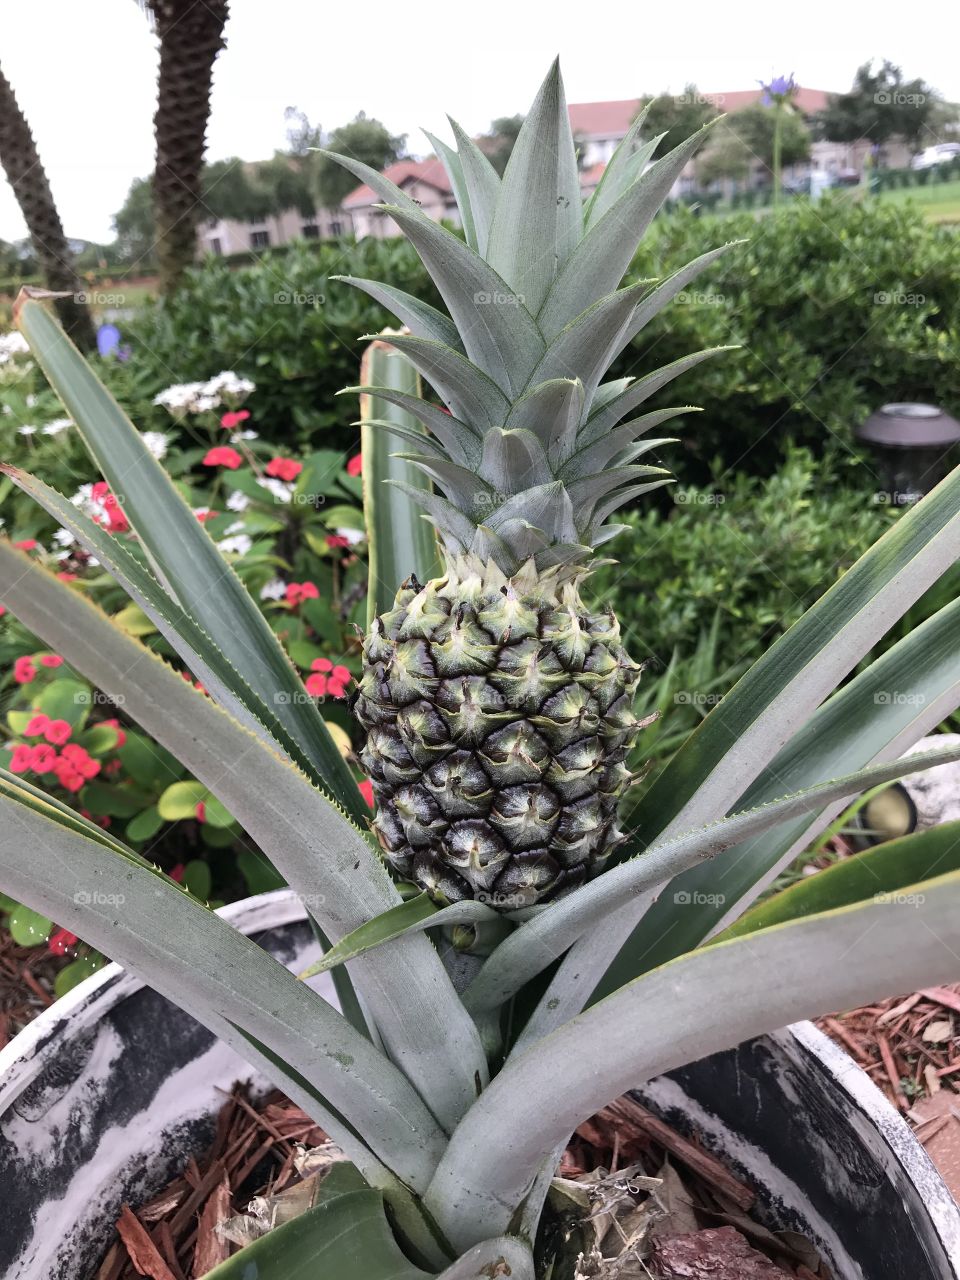 Birth of a pineapple 